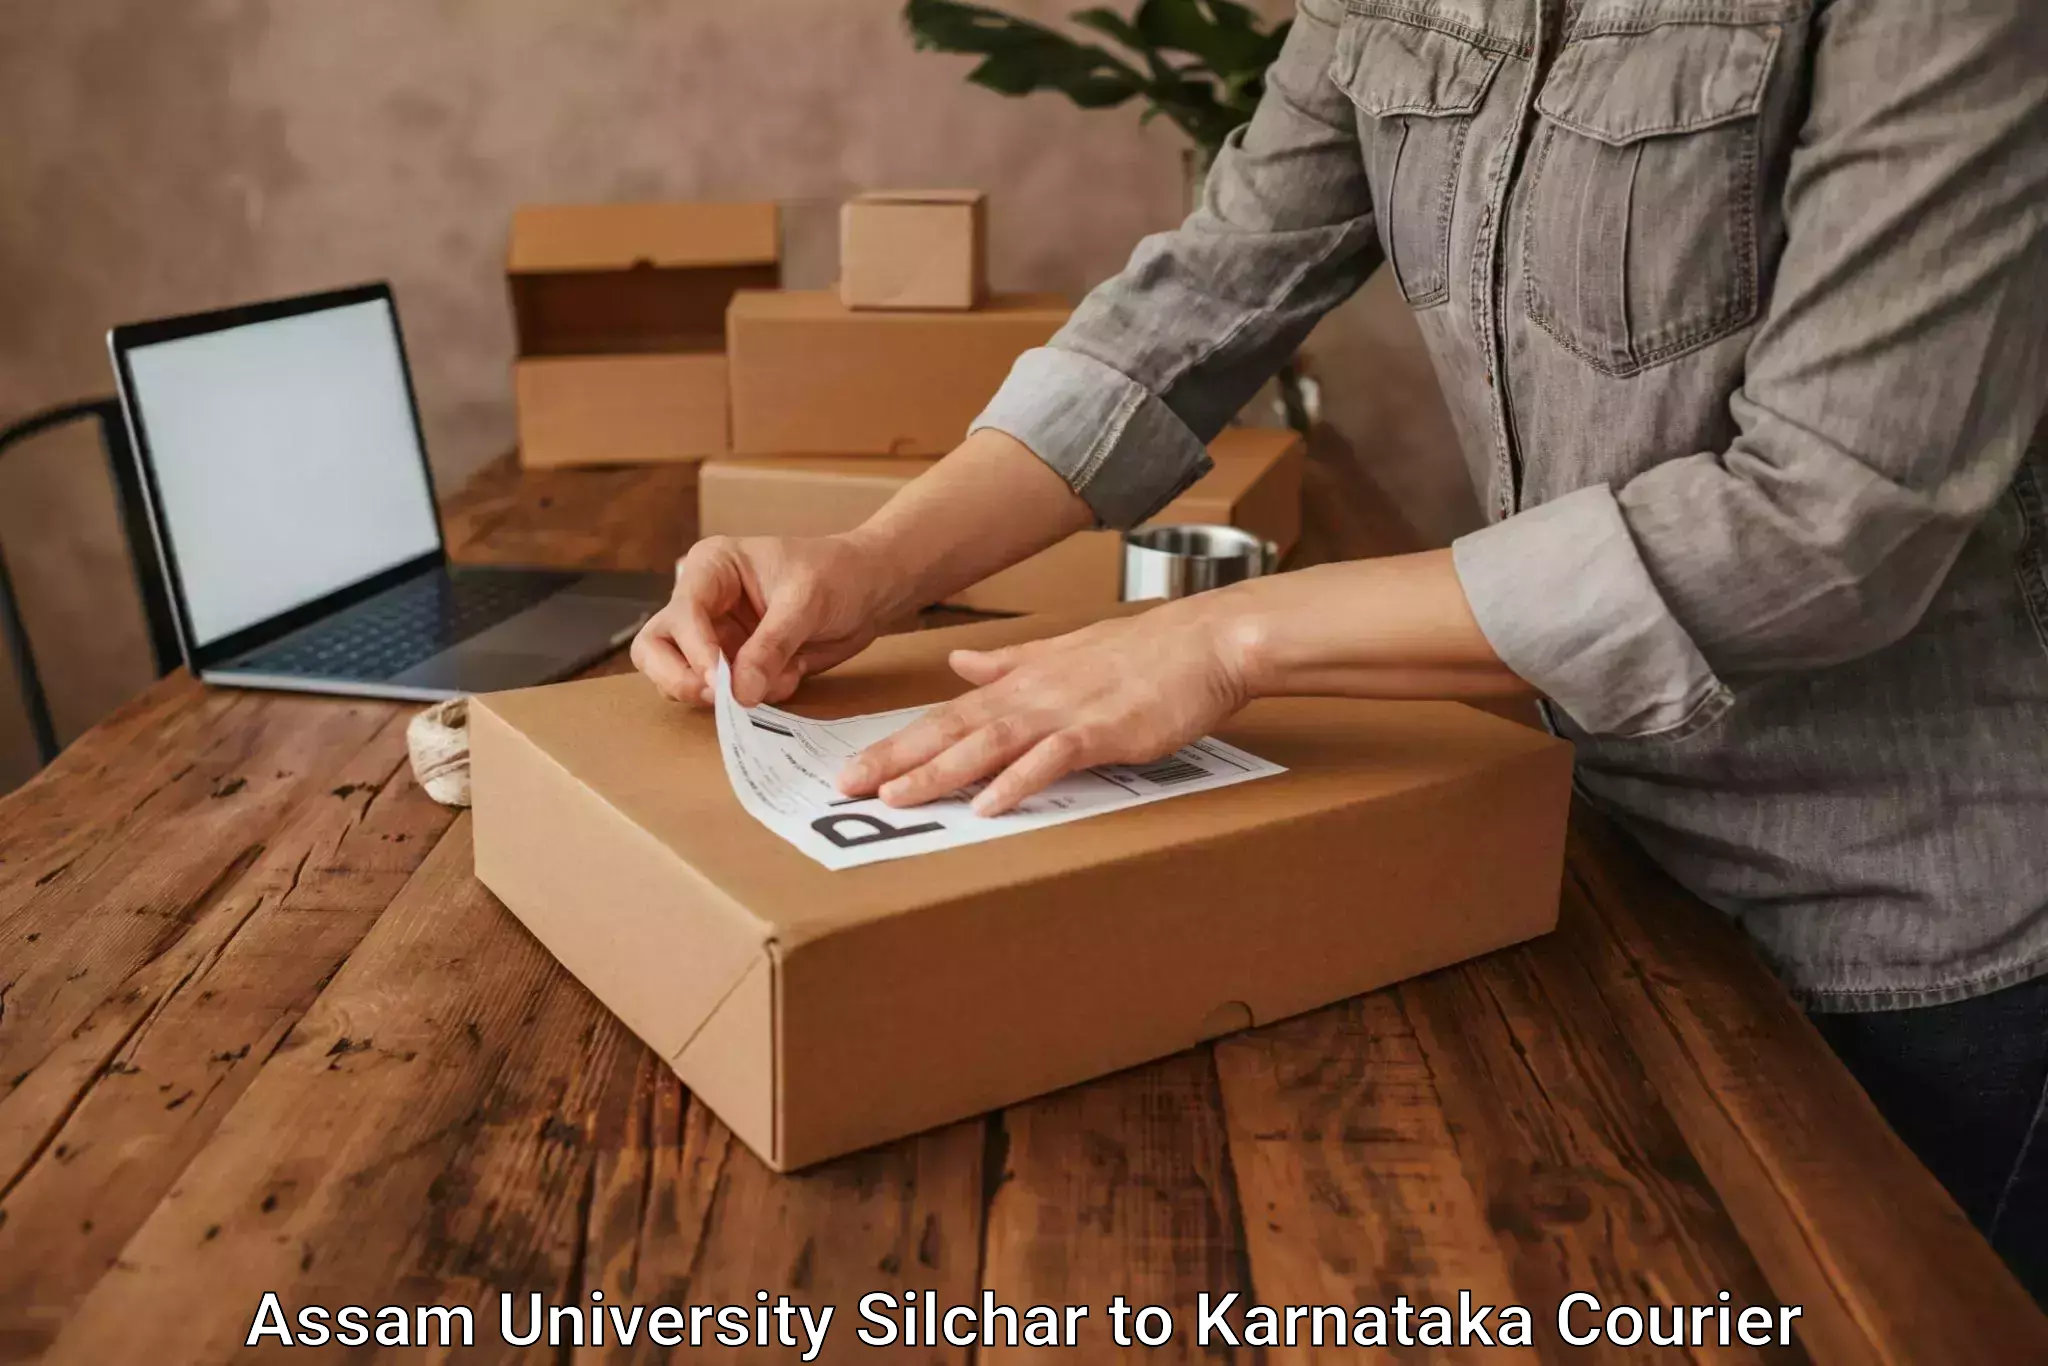 Expedited parcel delivery Assam University Silchar to Yadgiri